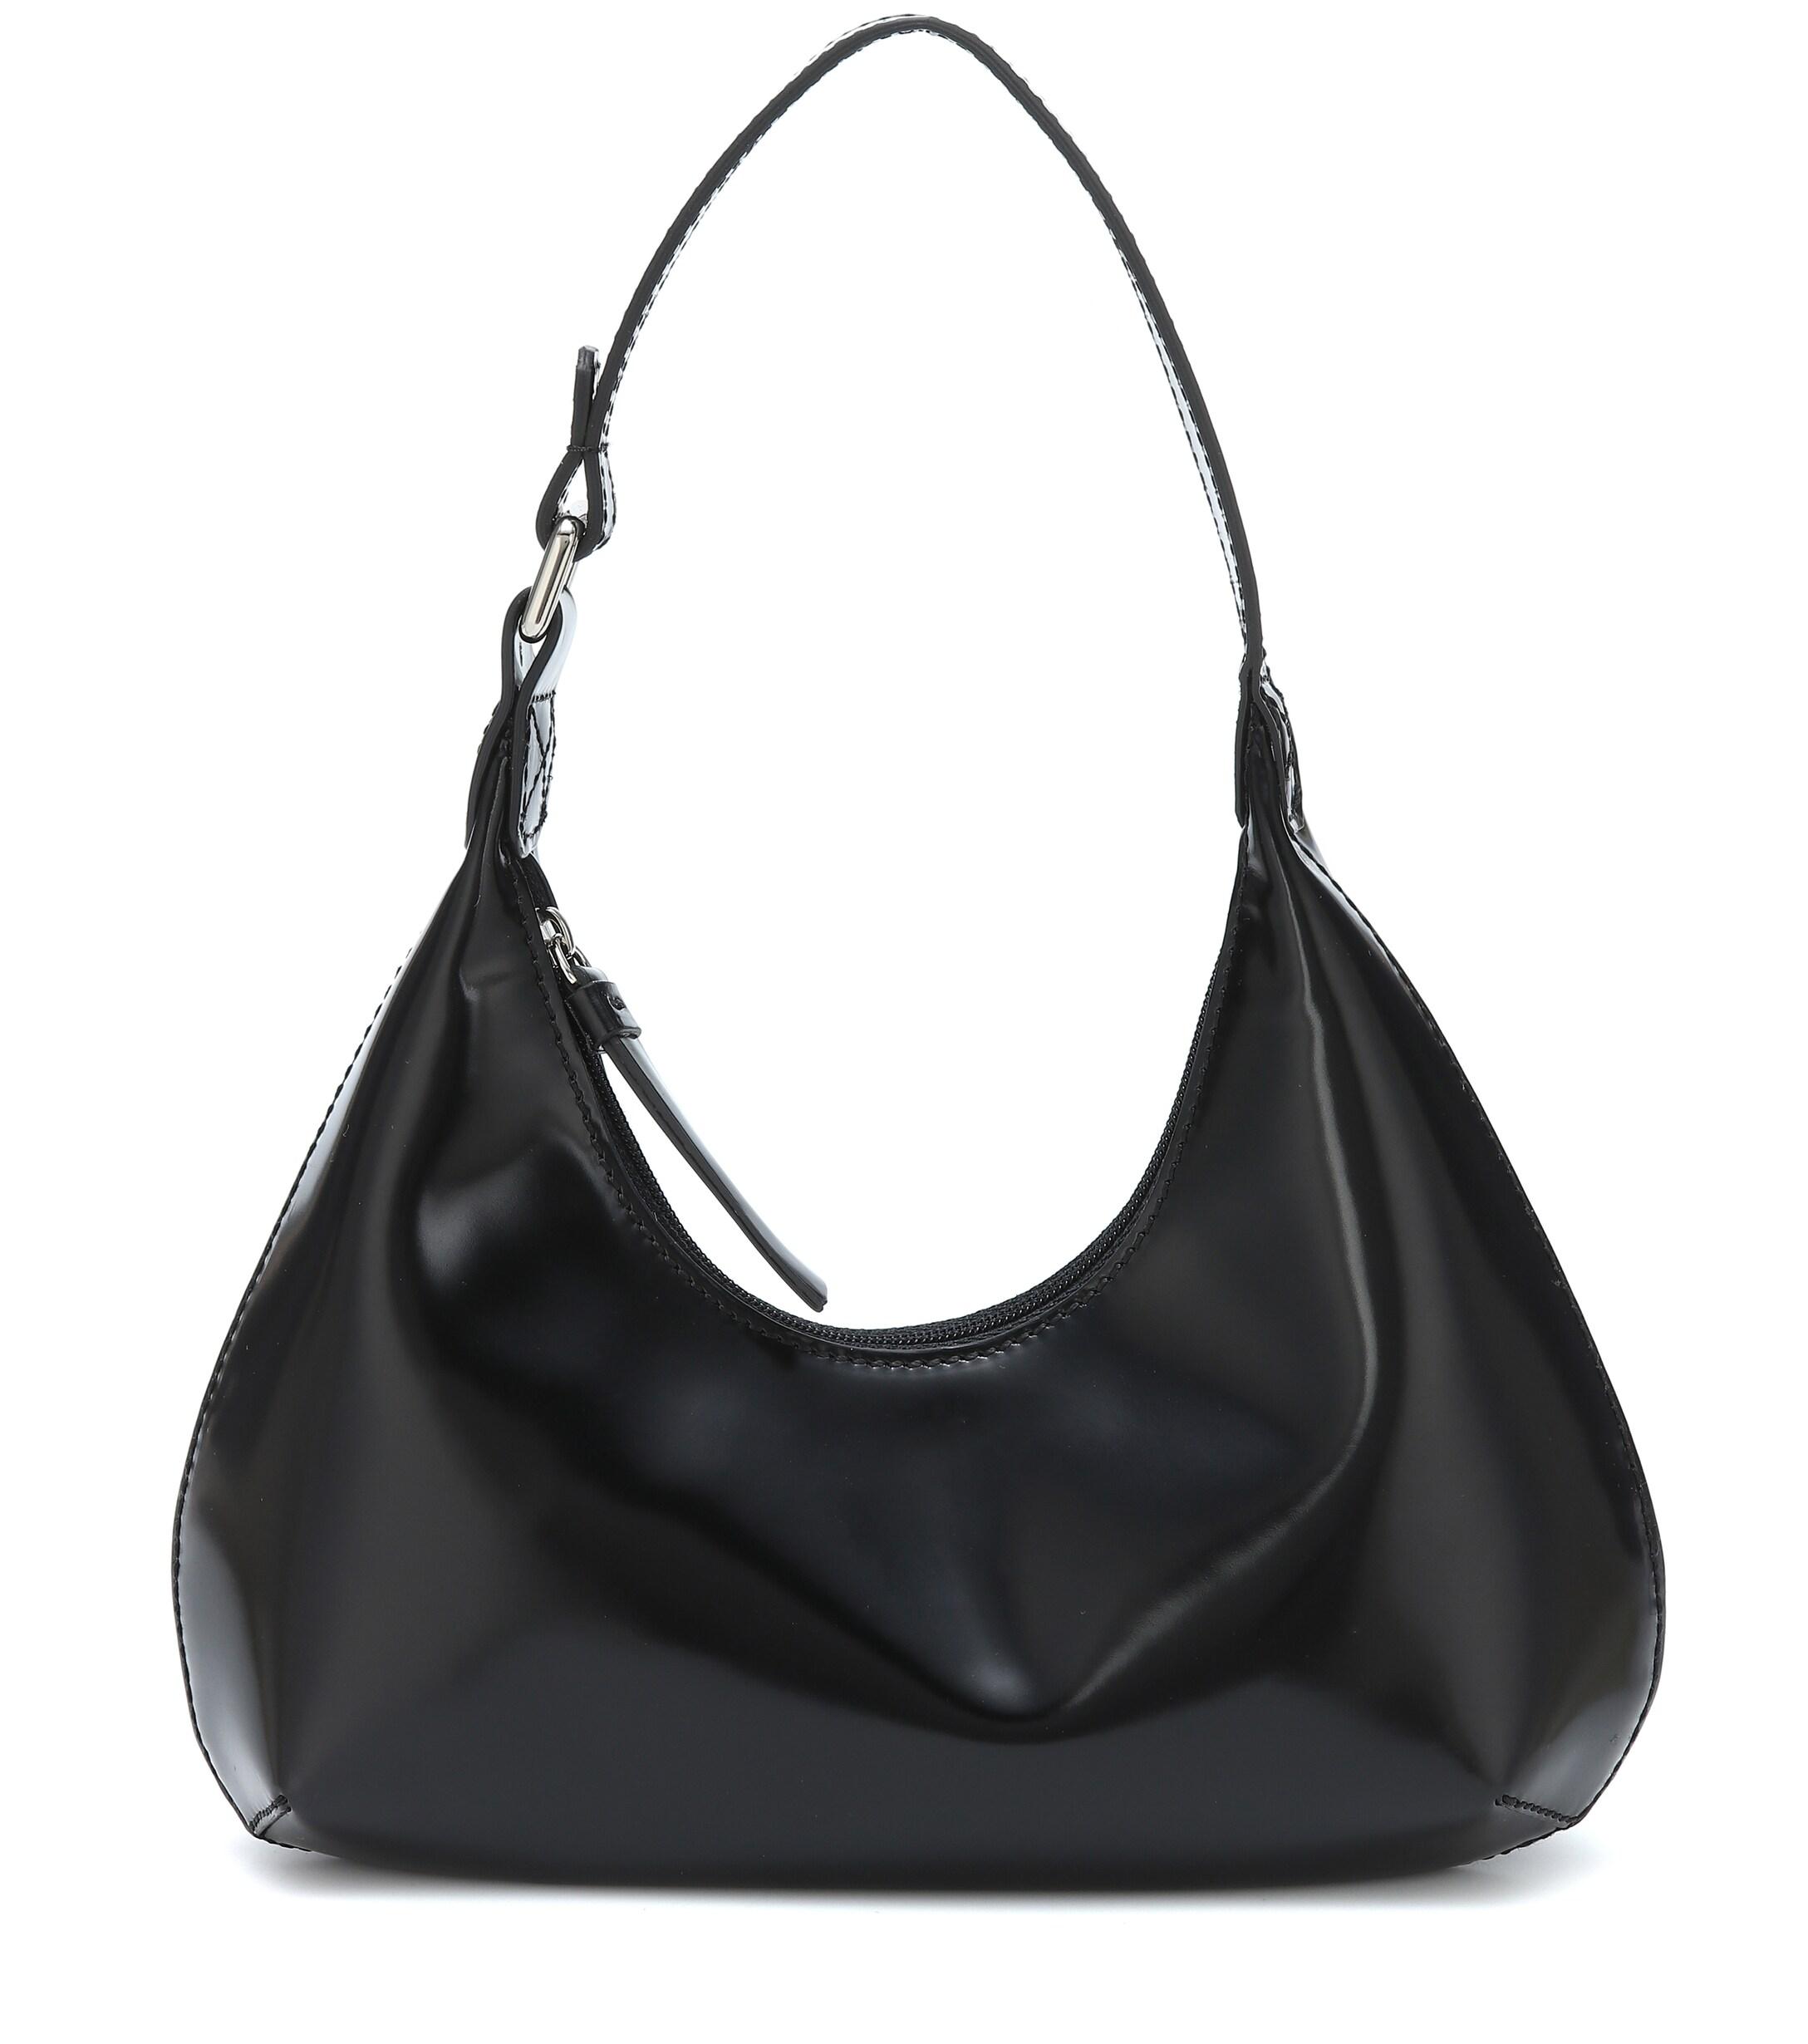 BY FAR Baby Amber Patent Leather Shoulder Bag in Black - Lyst